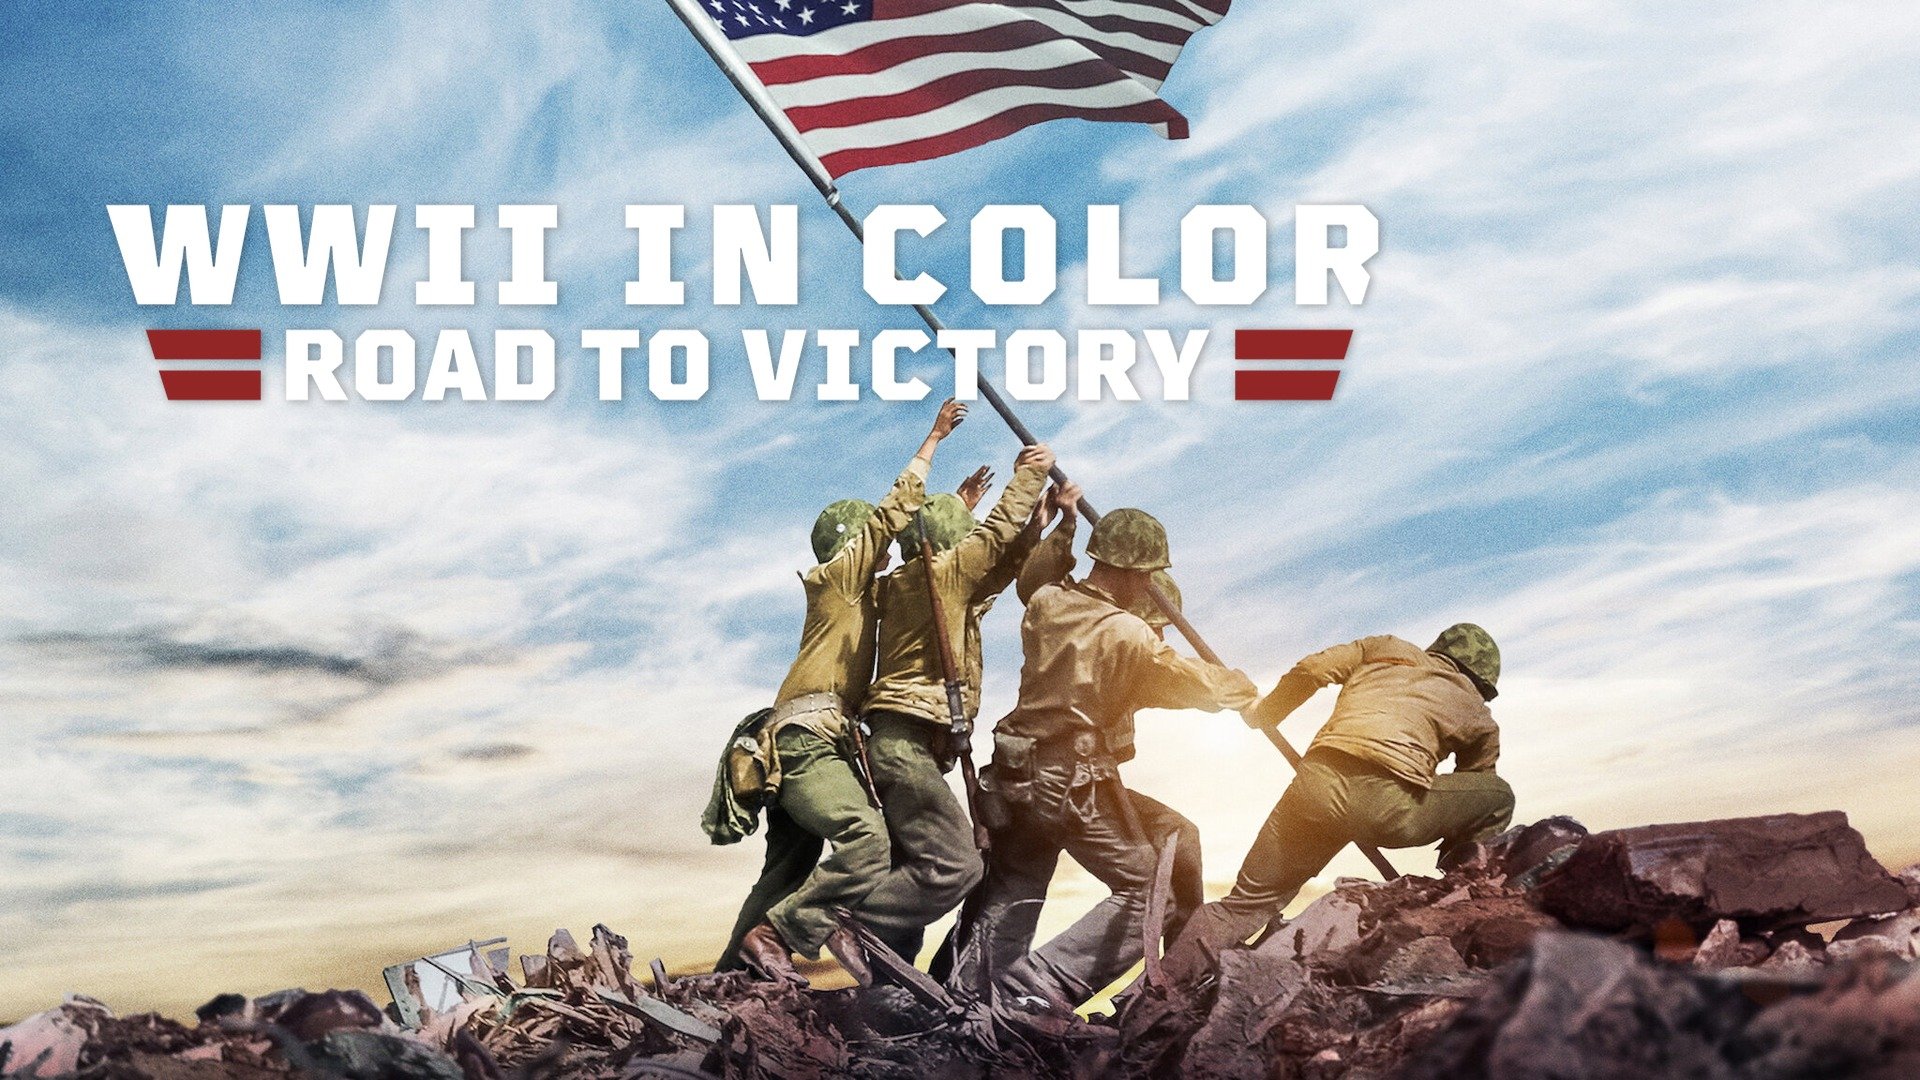 WWII in Color: Road to Victory - Netflix Documentary - Where To Watch